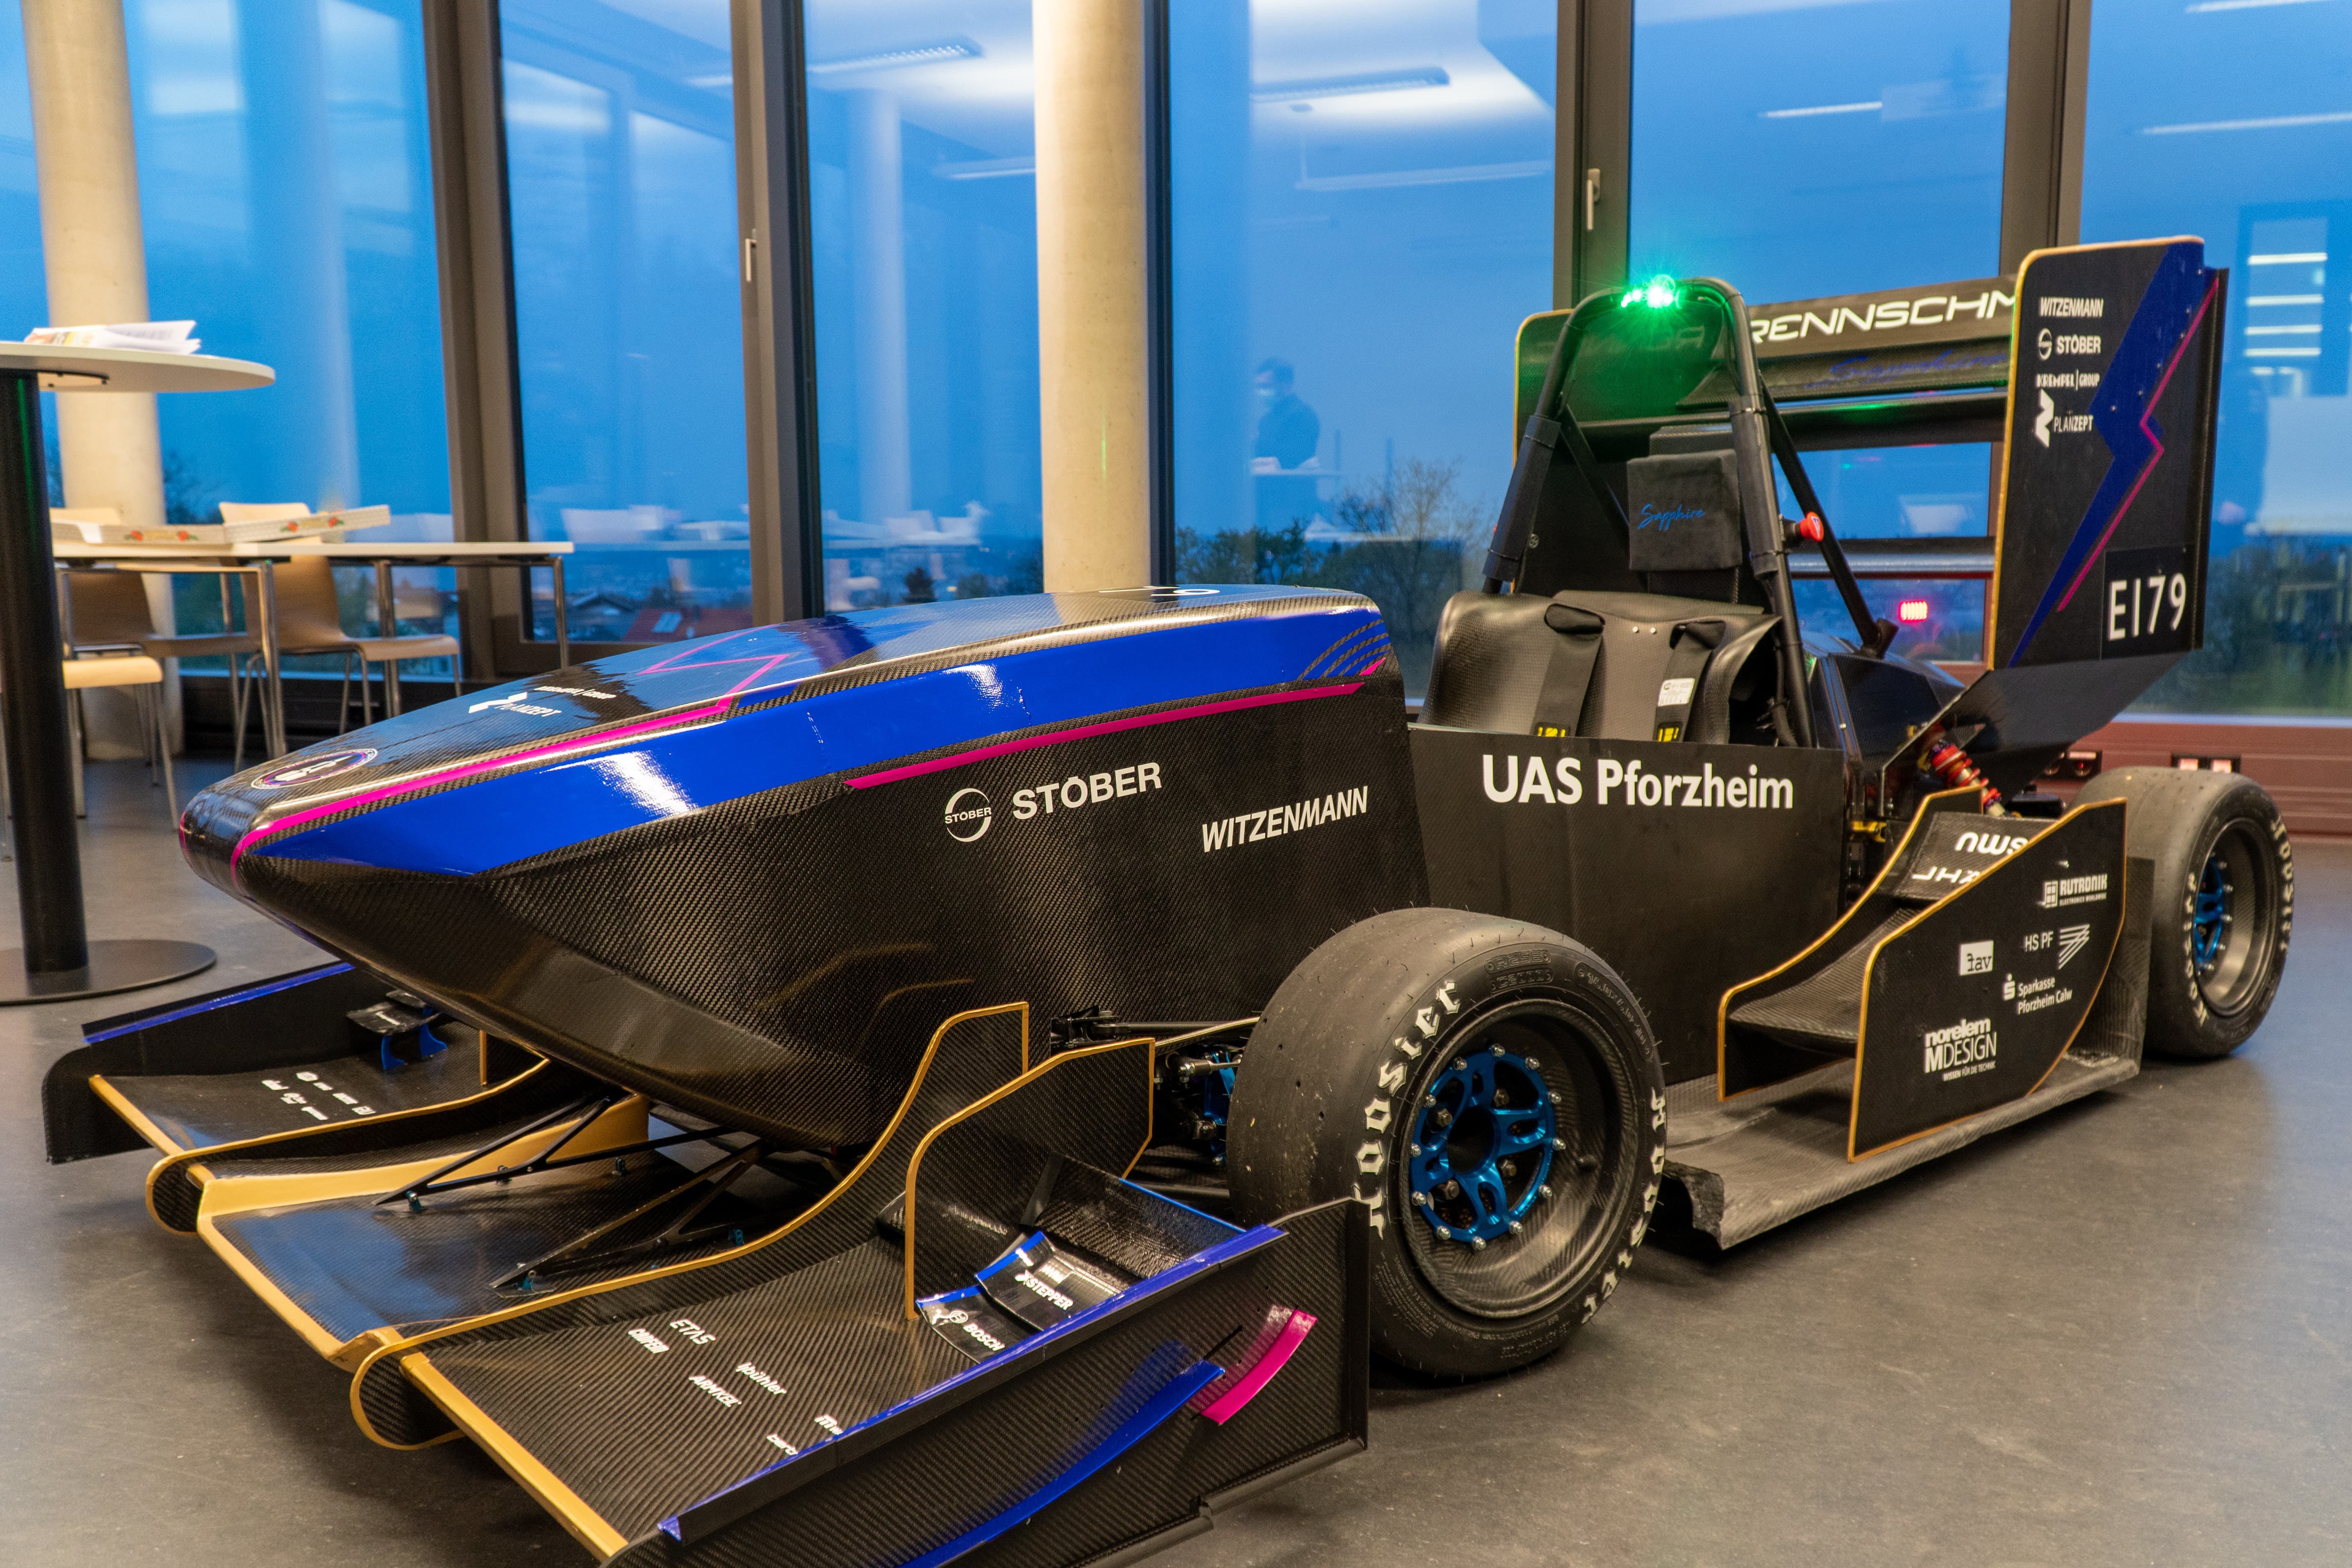 STOBER helps students design and build new electric racing car for Formula Student Electric (FSE).